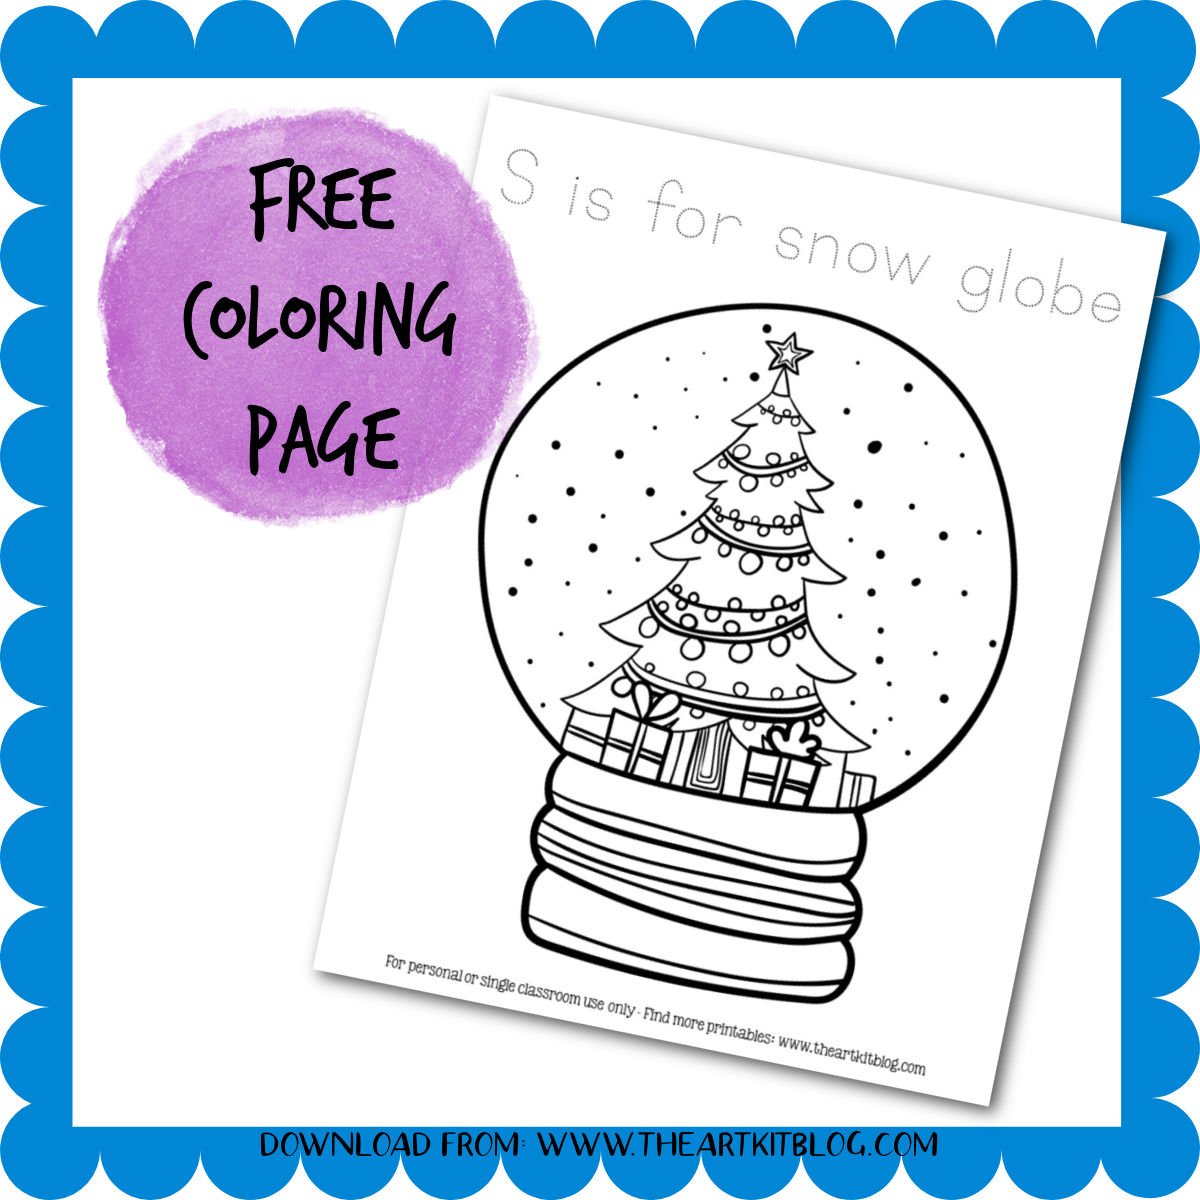 S is for snow globe coloring page worksheet â the art kit